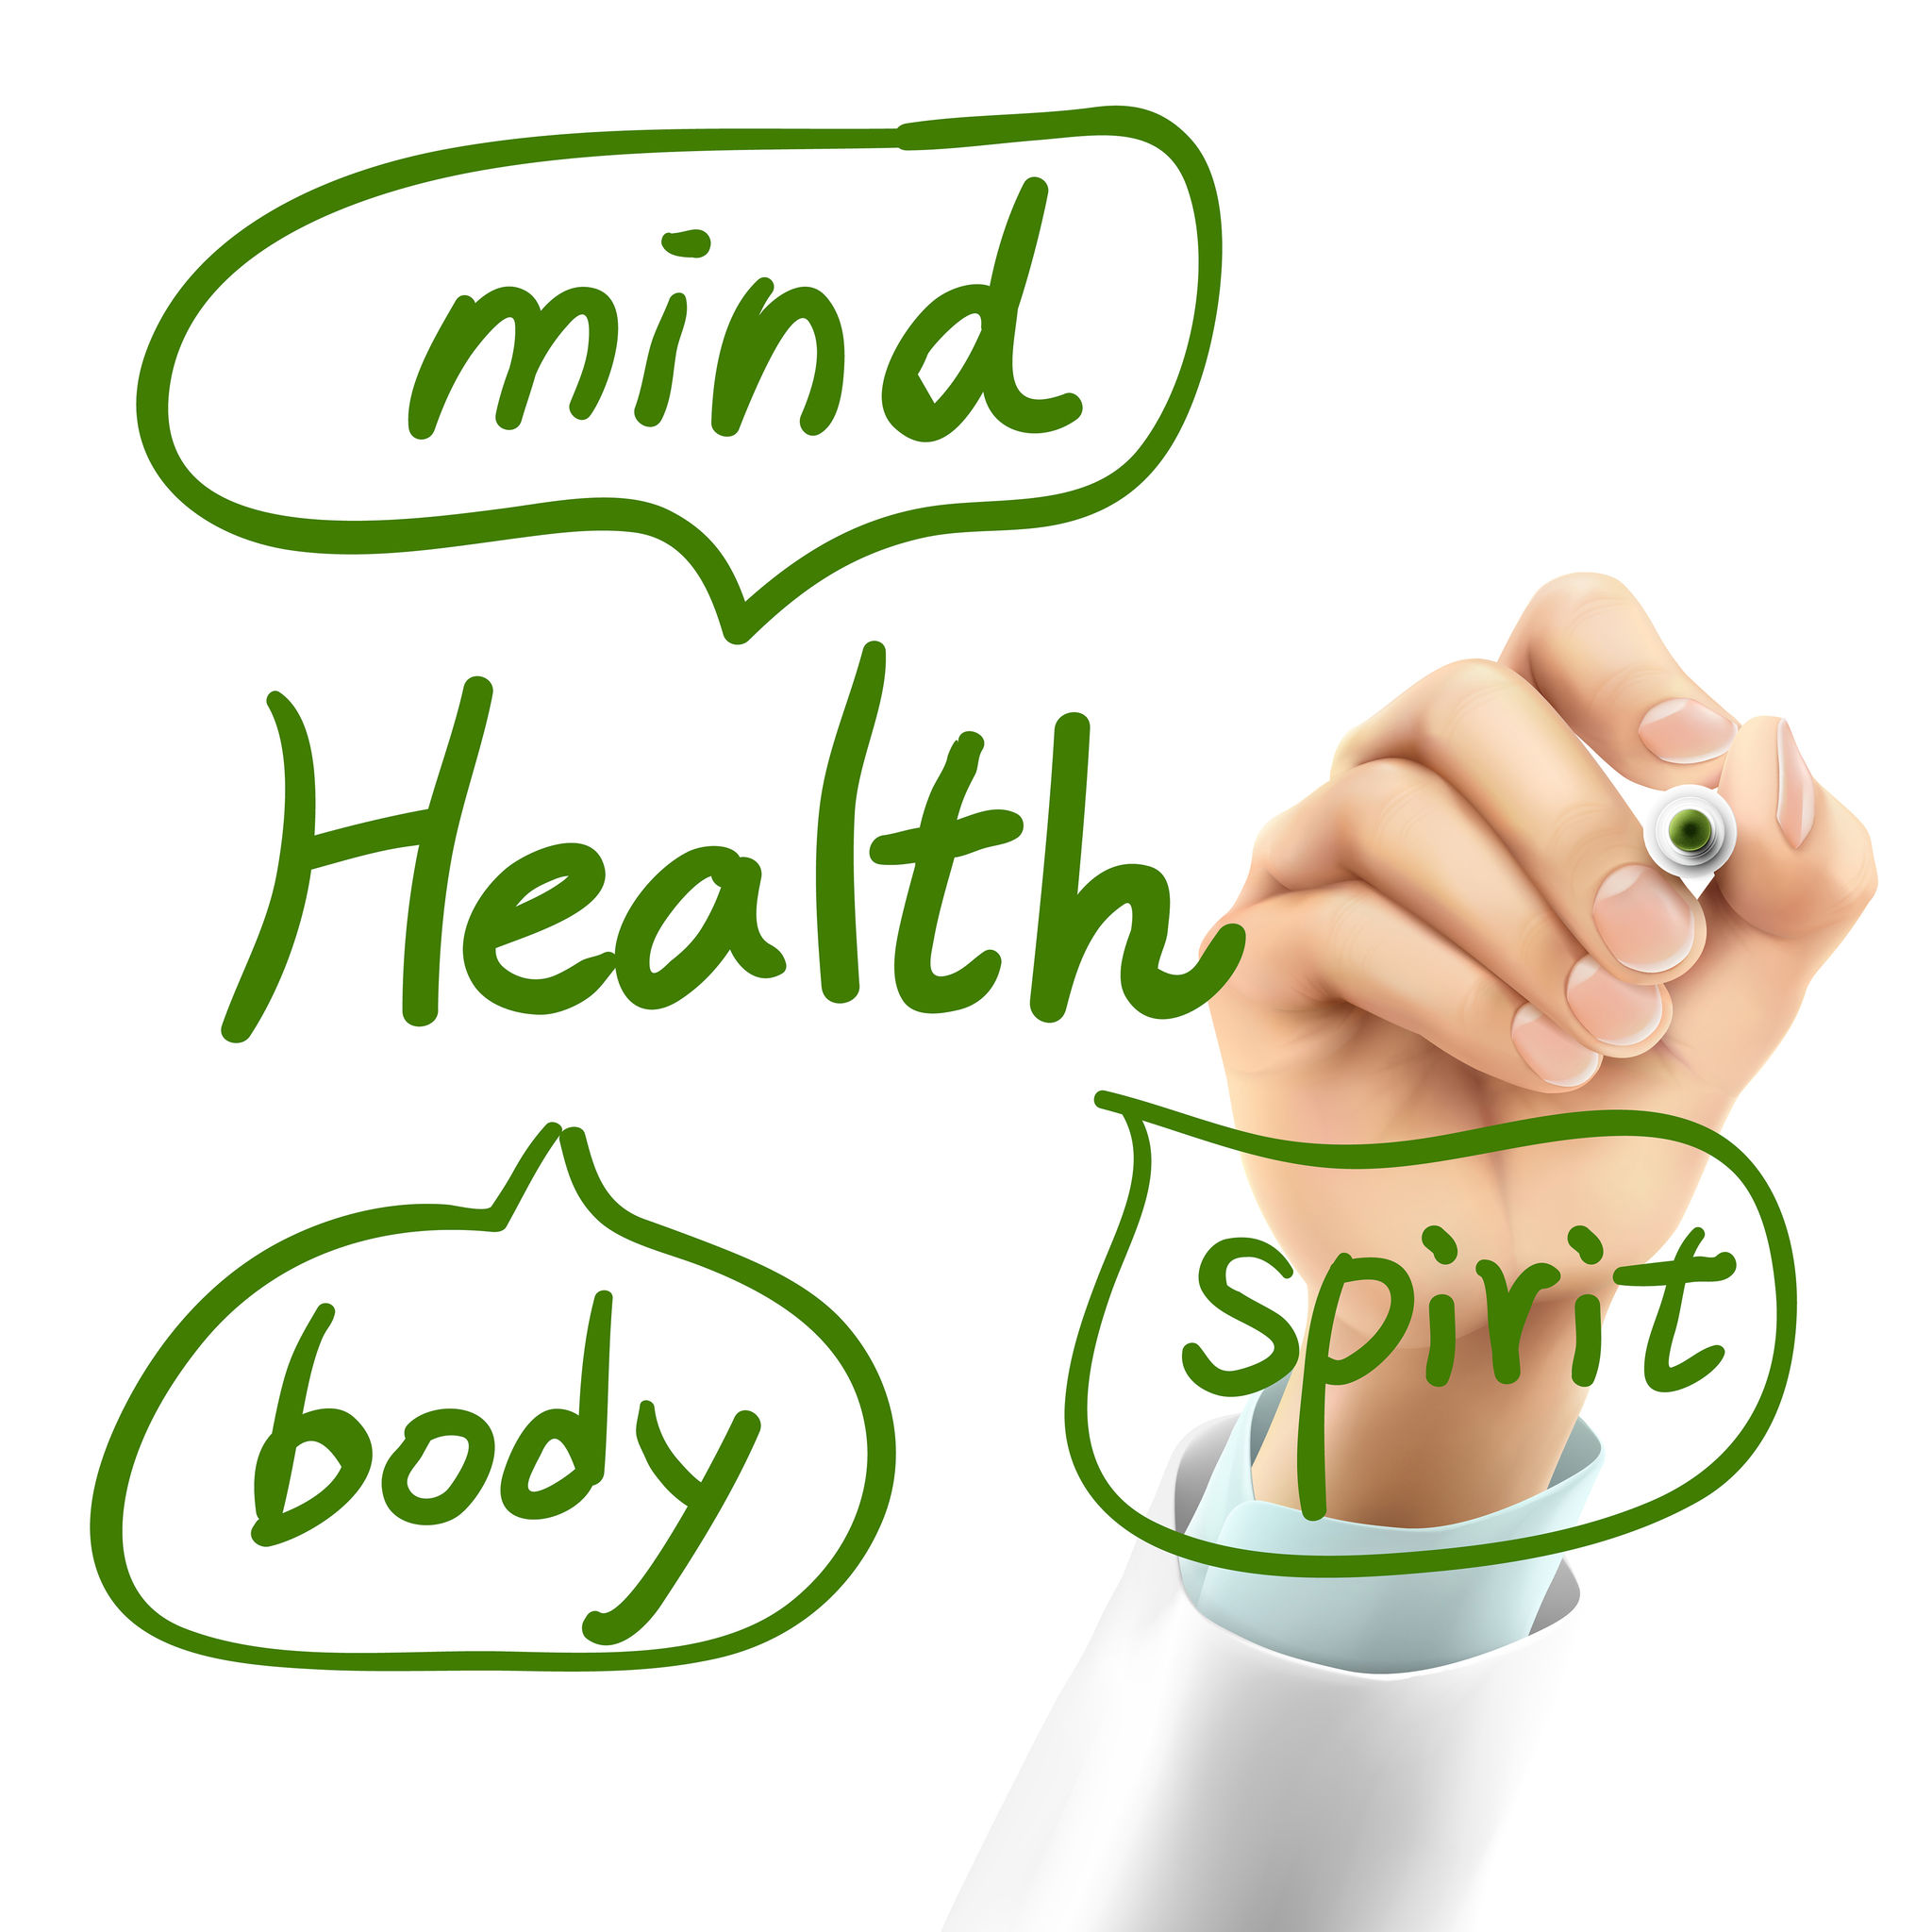 Health mantra. https://www.info-on-high-blood-pressure.com/Your-Power-To-Self-Heal.html